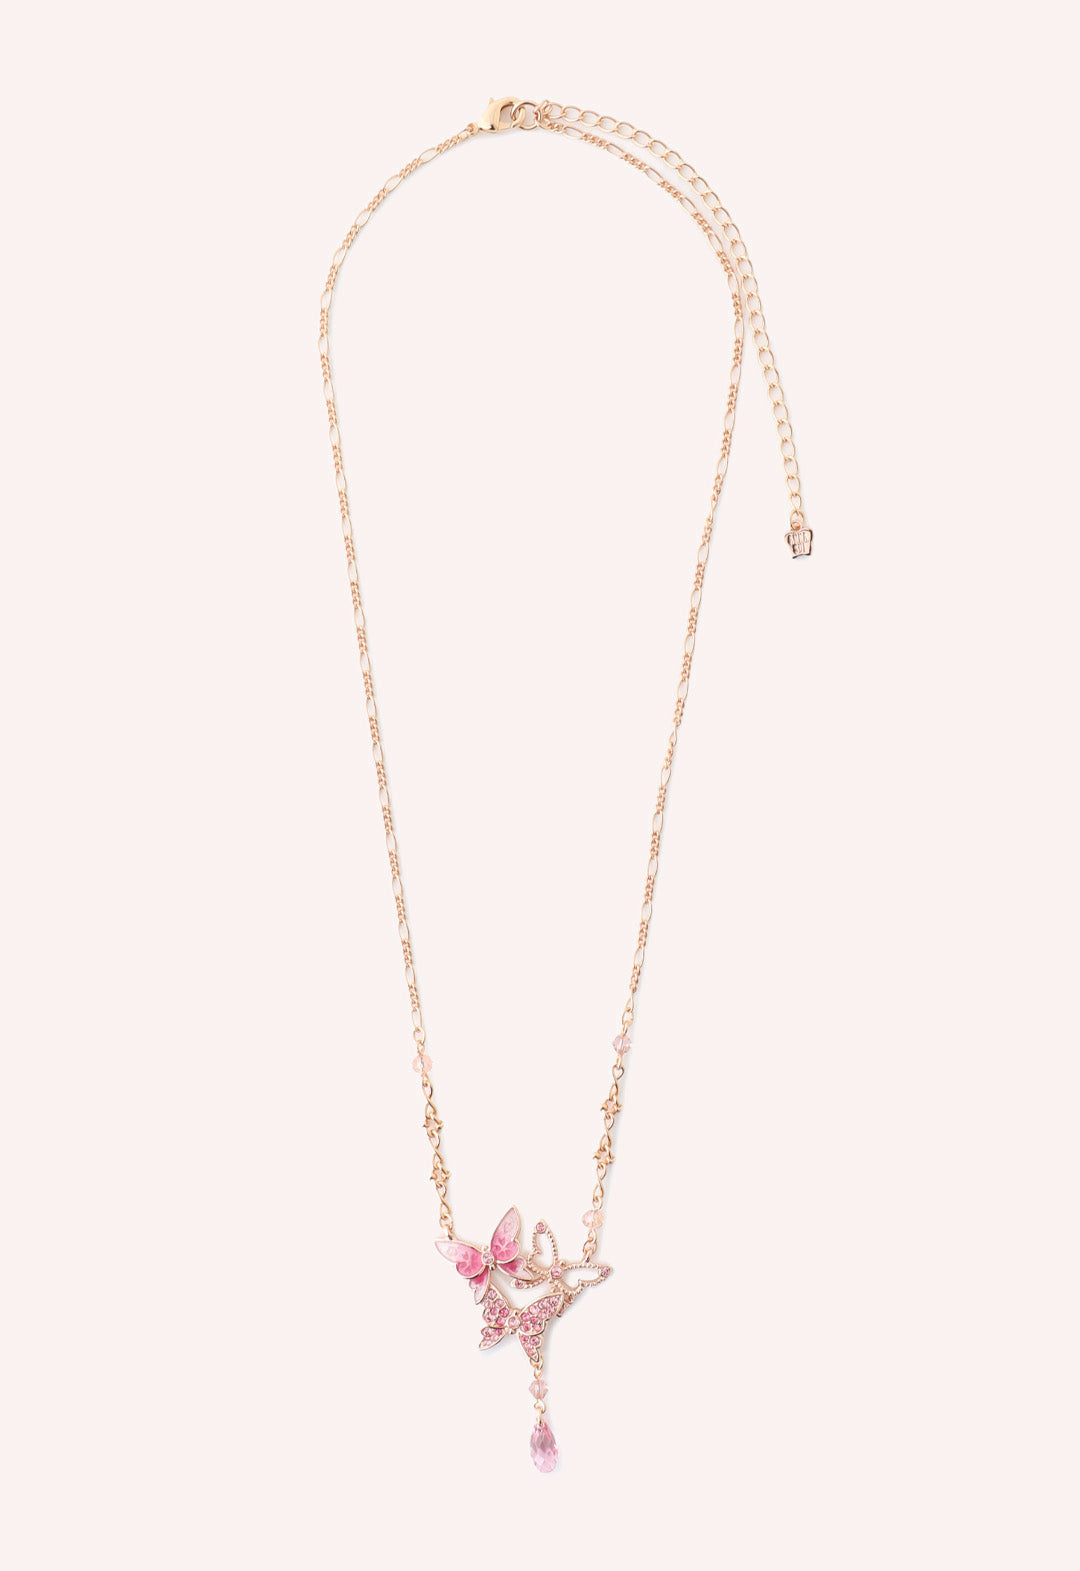 Bejeweled Butterfly Princess Necklace Pink Rosegold